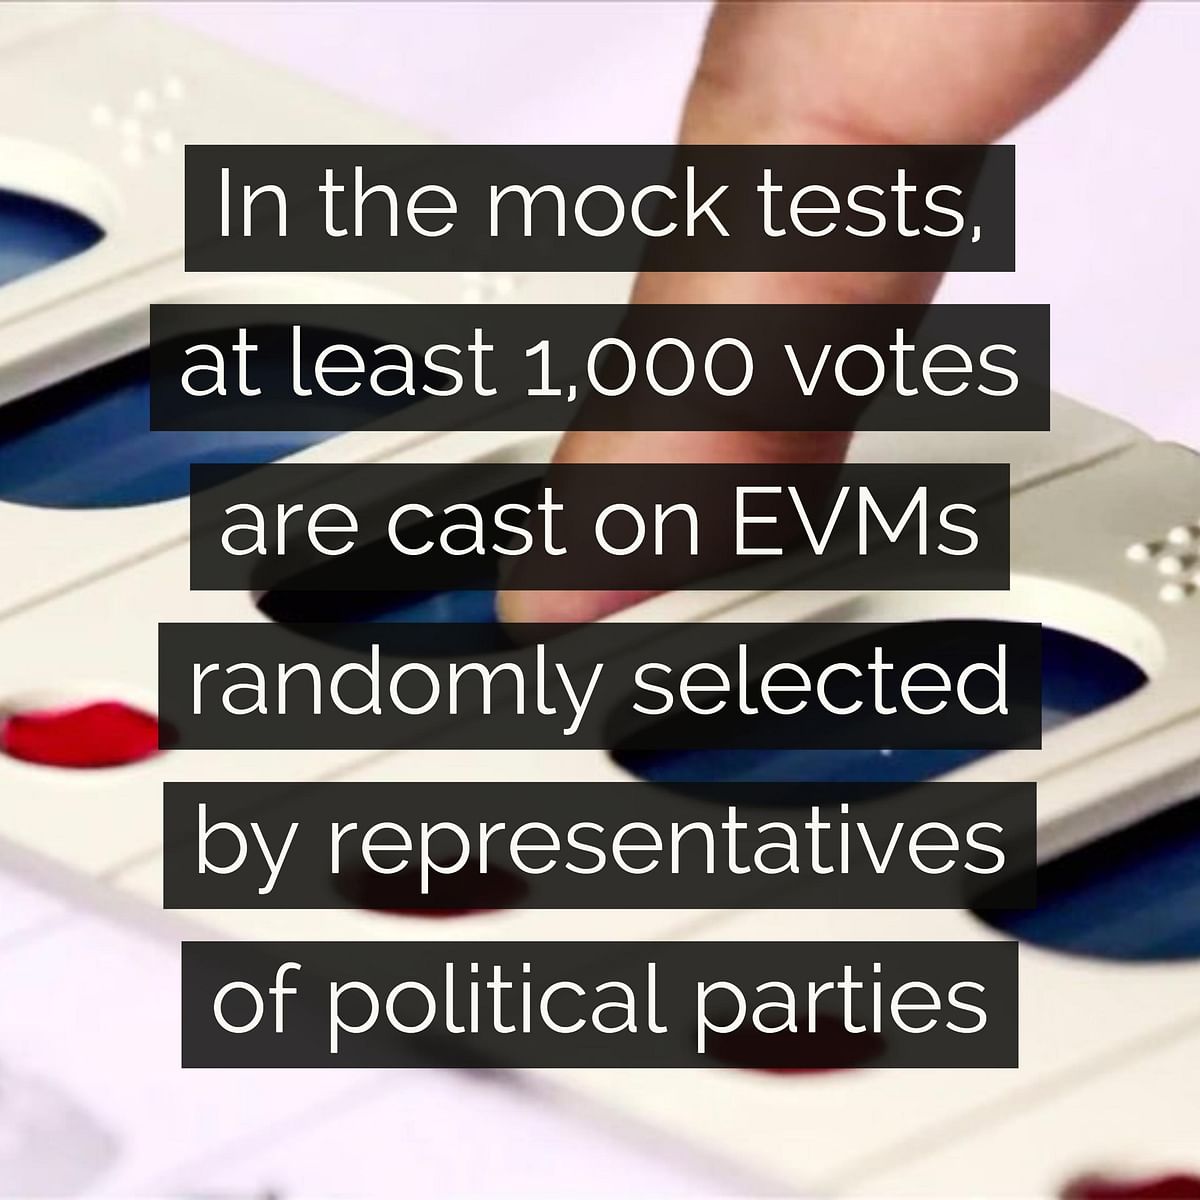 Here’s the Election Commission’s defence of their EVMs, stating the measures taken to ensure they are tamper-proof.